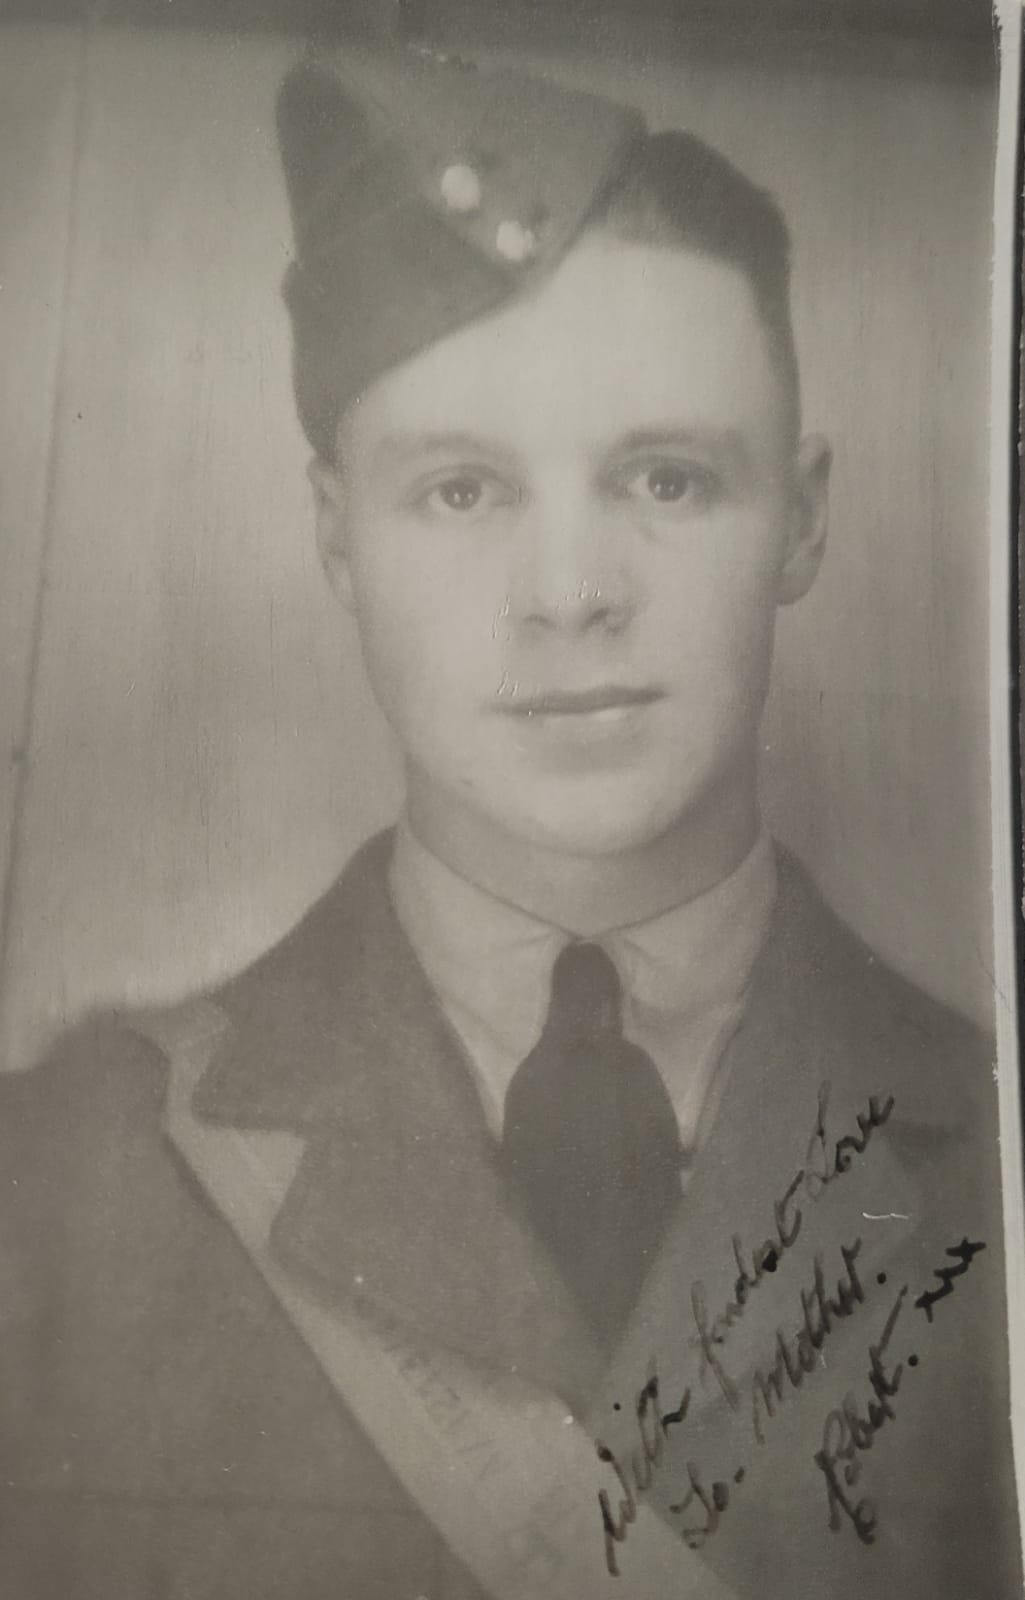 Image shows a black and white portrait photo of Captain Stewart's grandfather when he was younger.